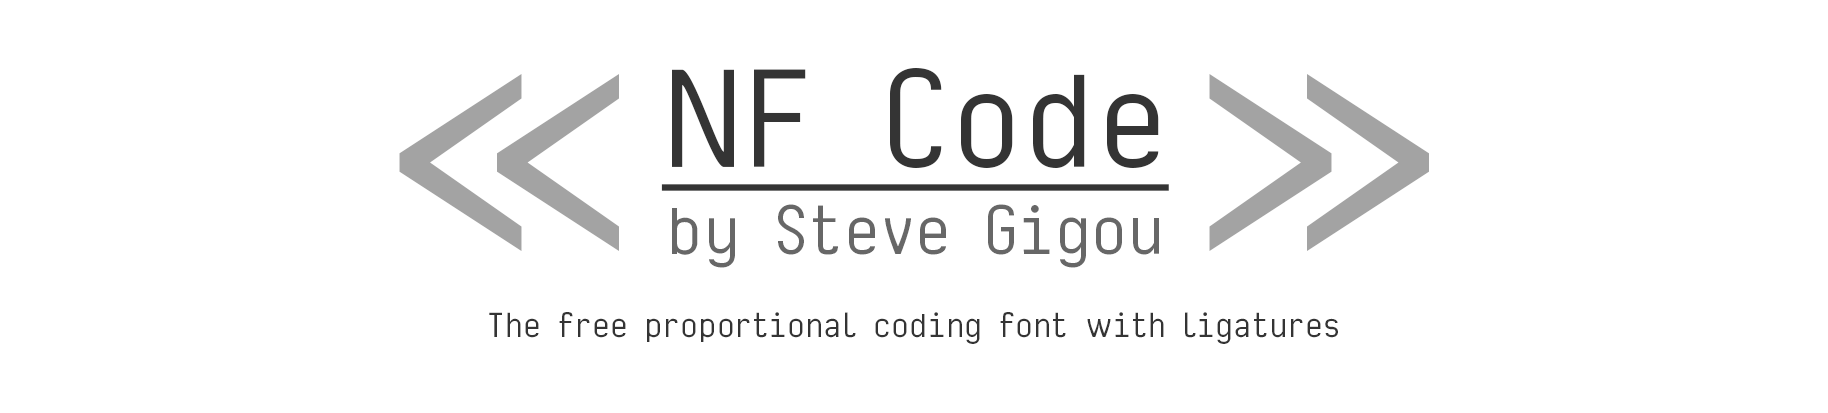 NF Code by Steve Gigou - A free proportional coding font with ligatures